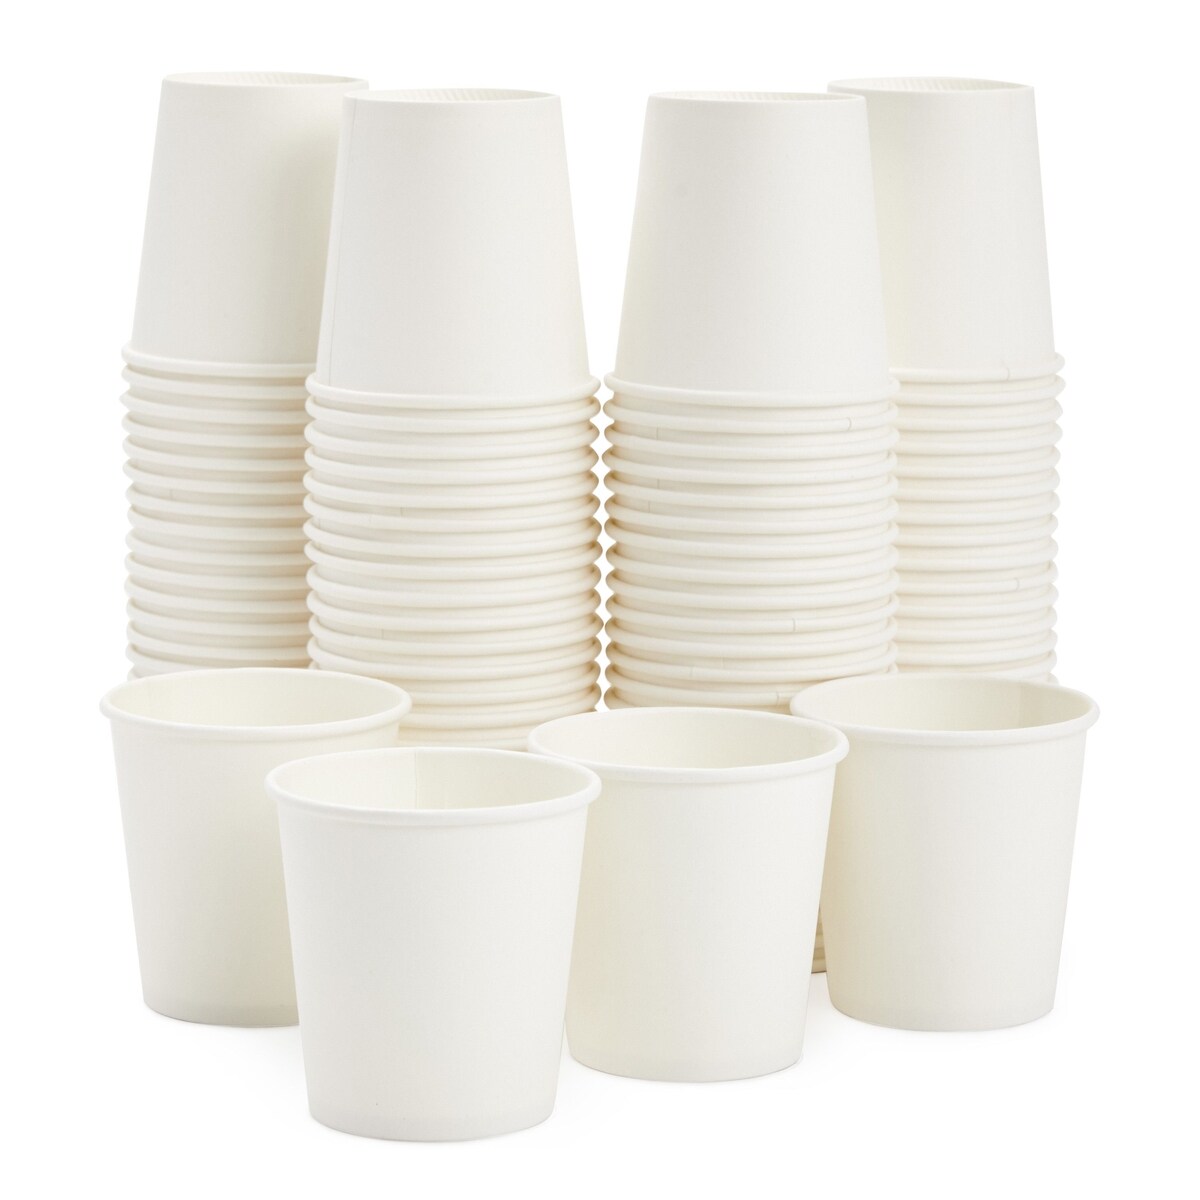 Pack Of 100 Disposable 50ml Small Paper Party Taste Cups, Free Shipping